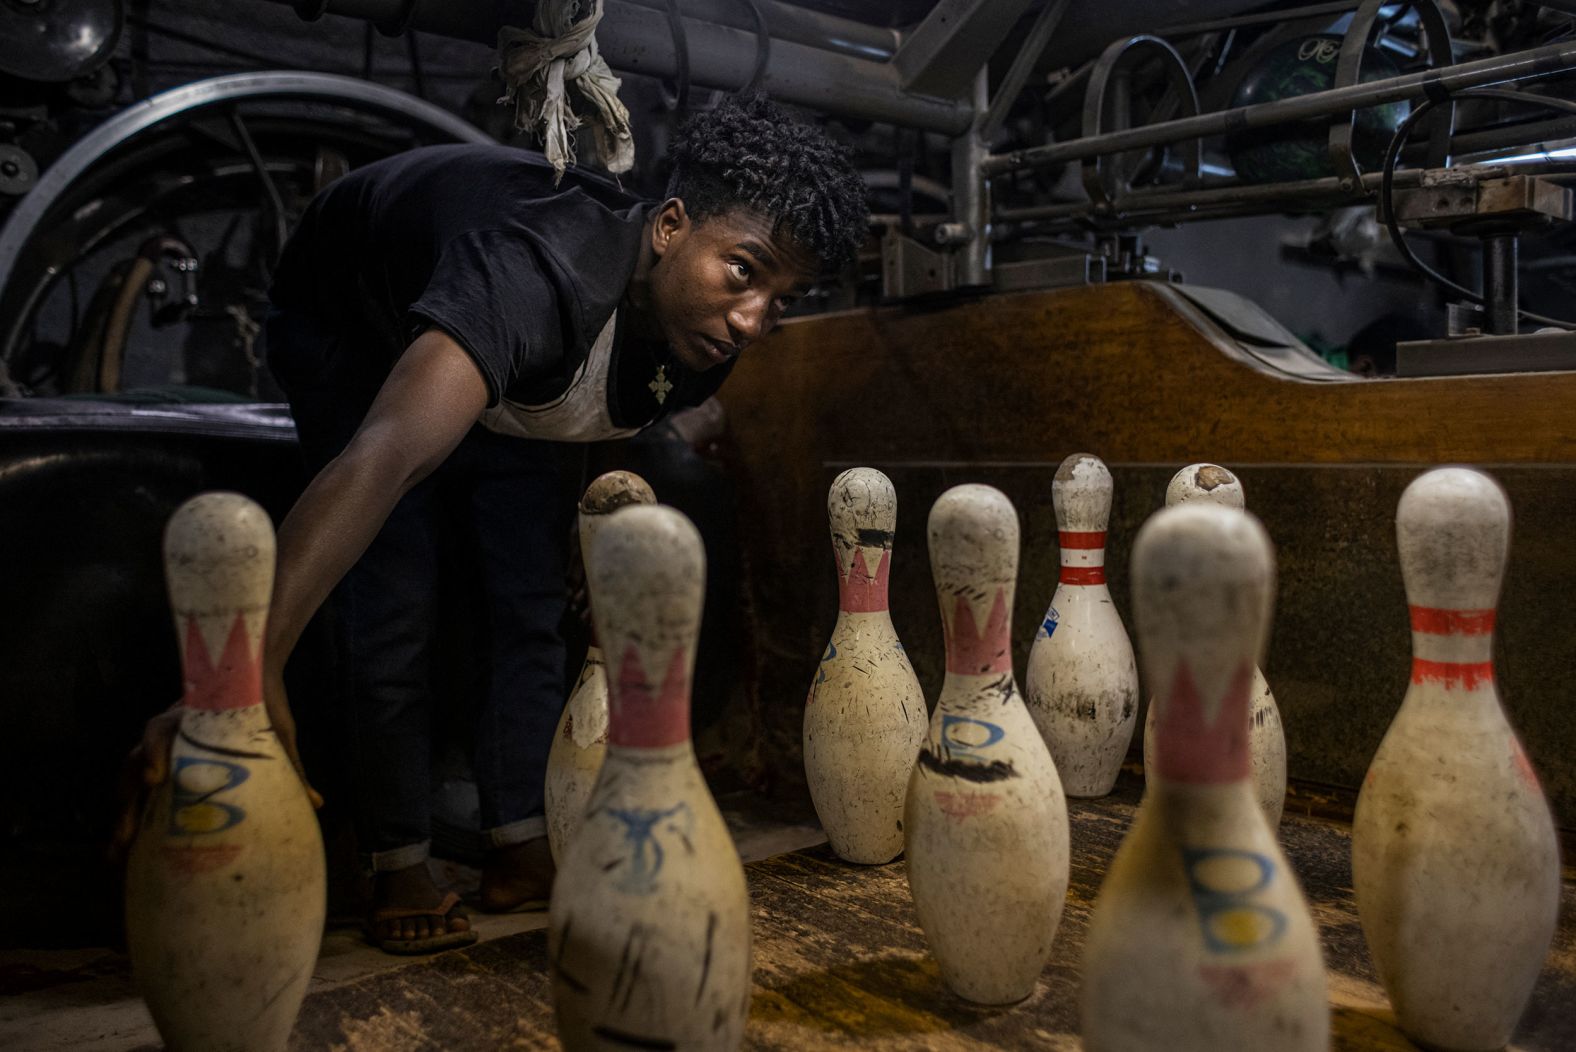 An employee manually resets bowling pins at Guenet Bowling in Addis Ababa, Ethiopia, on Friday, February 2. The employees there also keep score and throw the balls back. The vintage bowling alley was inaugurated in 1955.